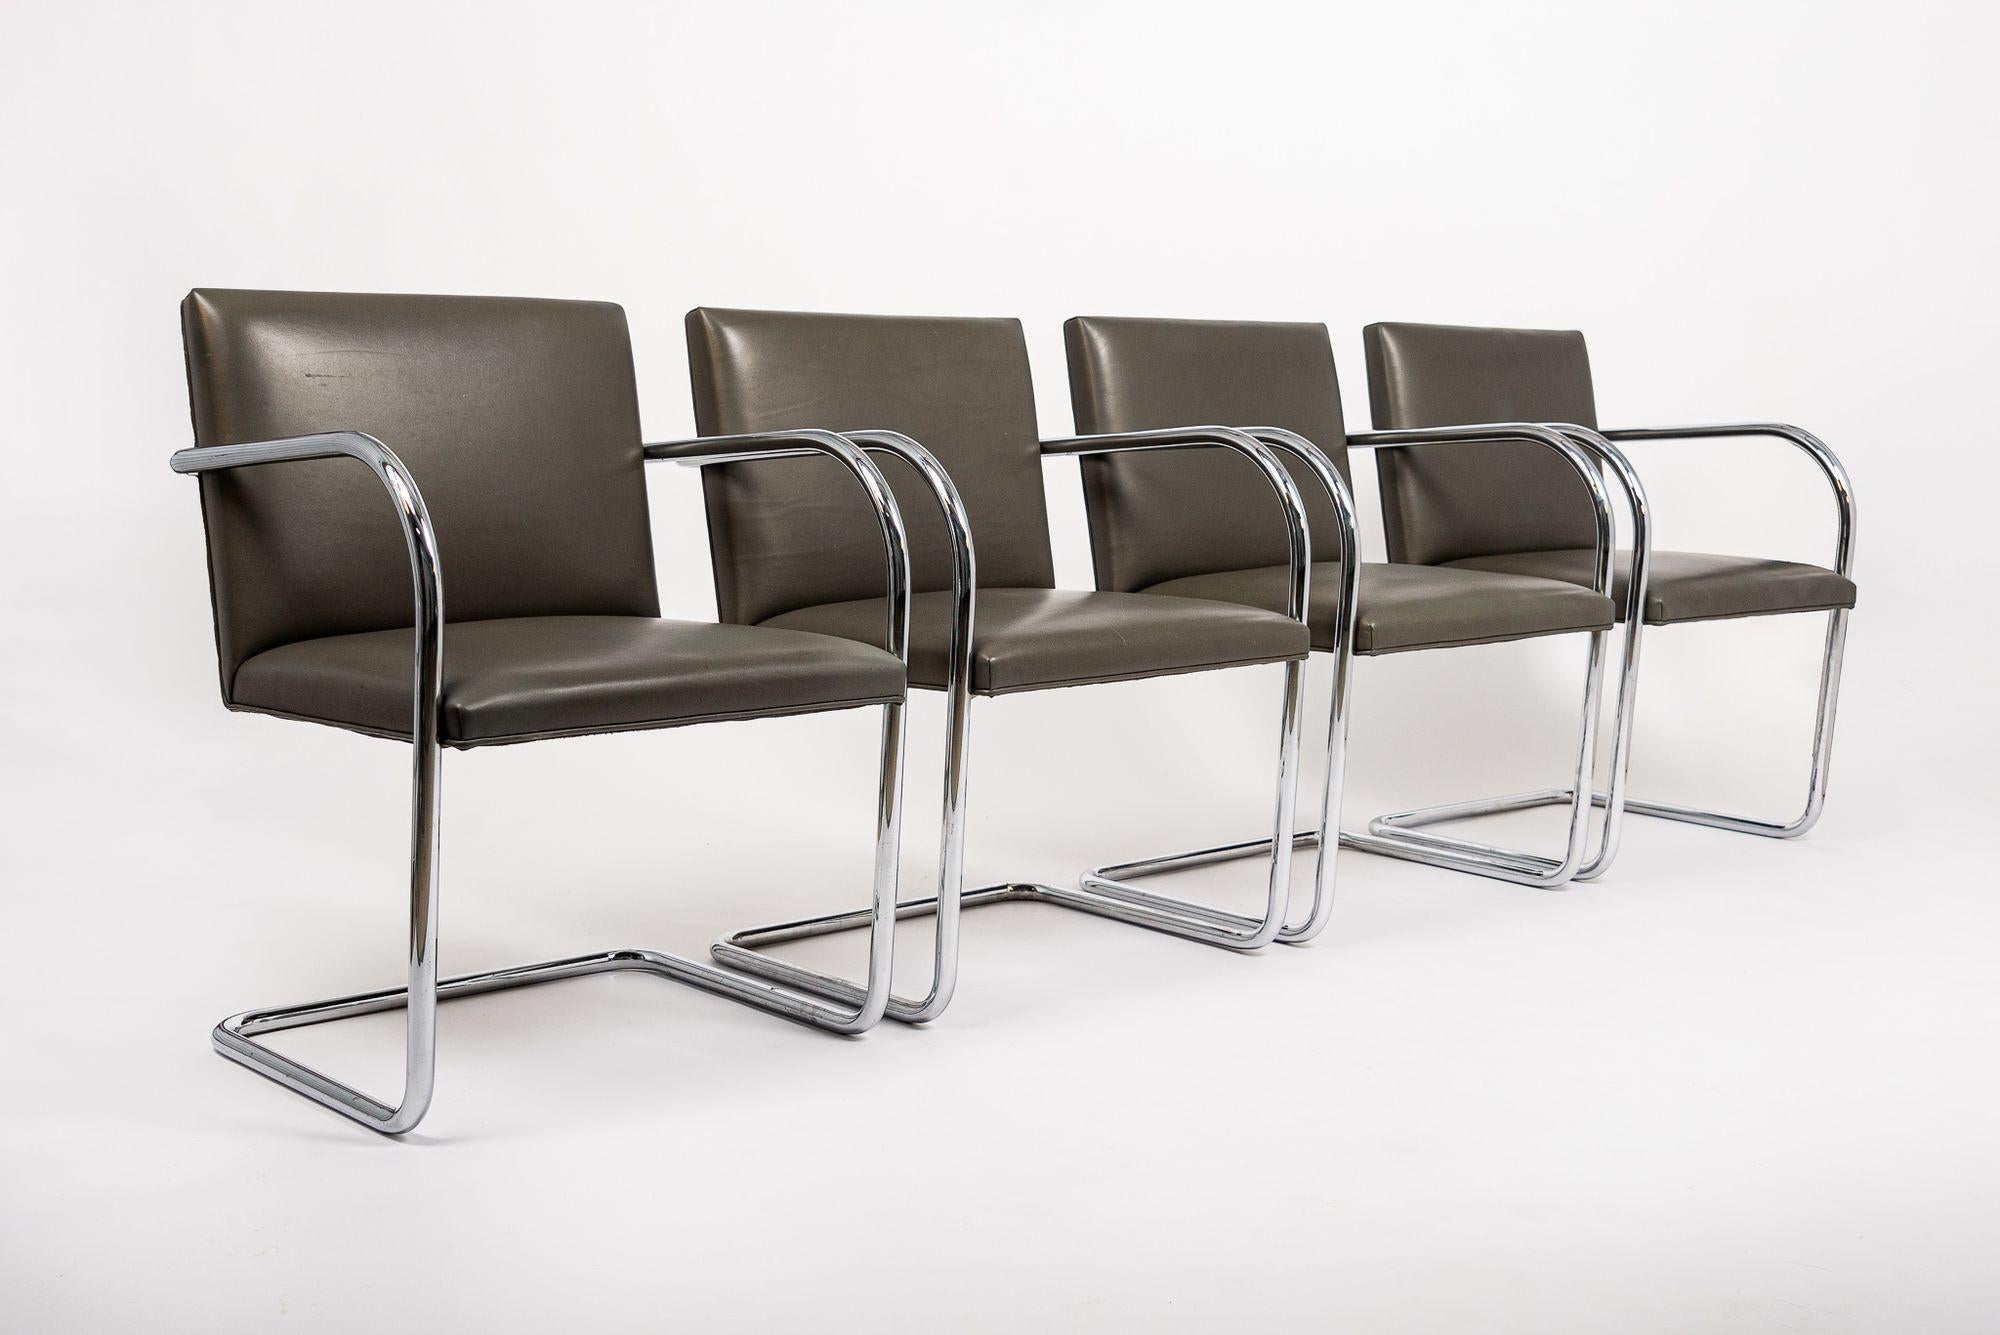 This set of four (8 available) mid century modern cantilever Brno arm chairs by Mies van der Rohe for Knoll were produced in 2002. These iconic Bauhaus modernist chairs originally designed by Ludwig Mies van der Rohe in 1930 feature clean lines and